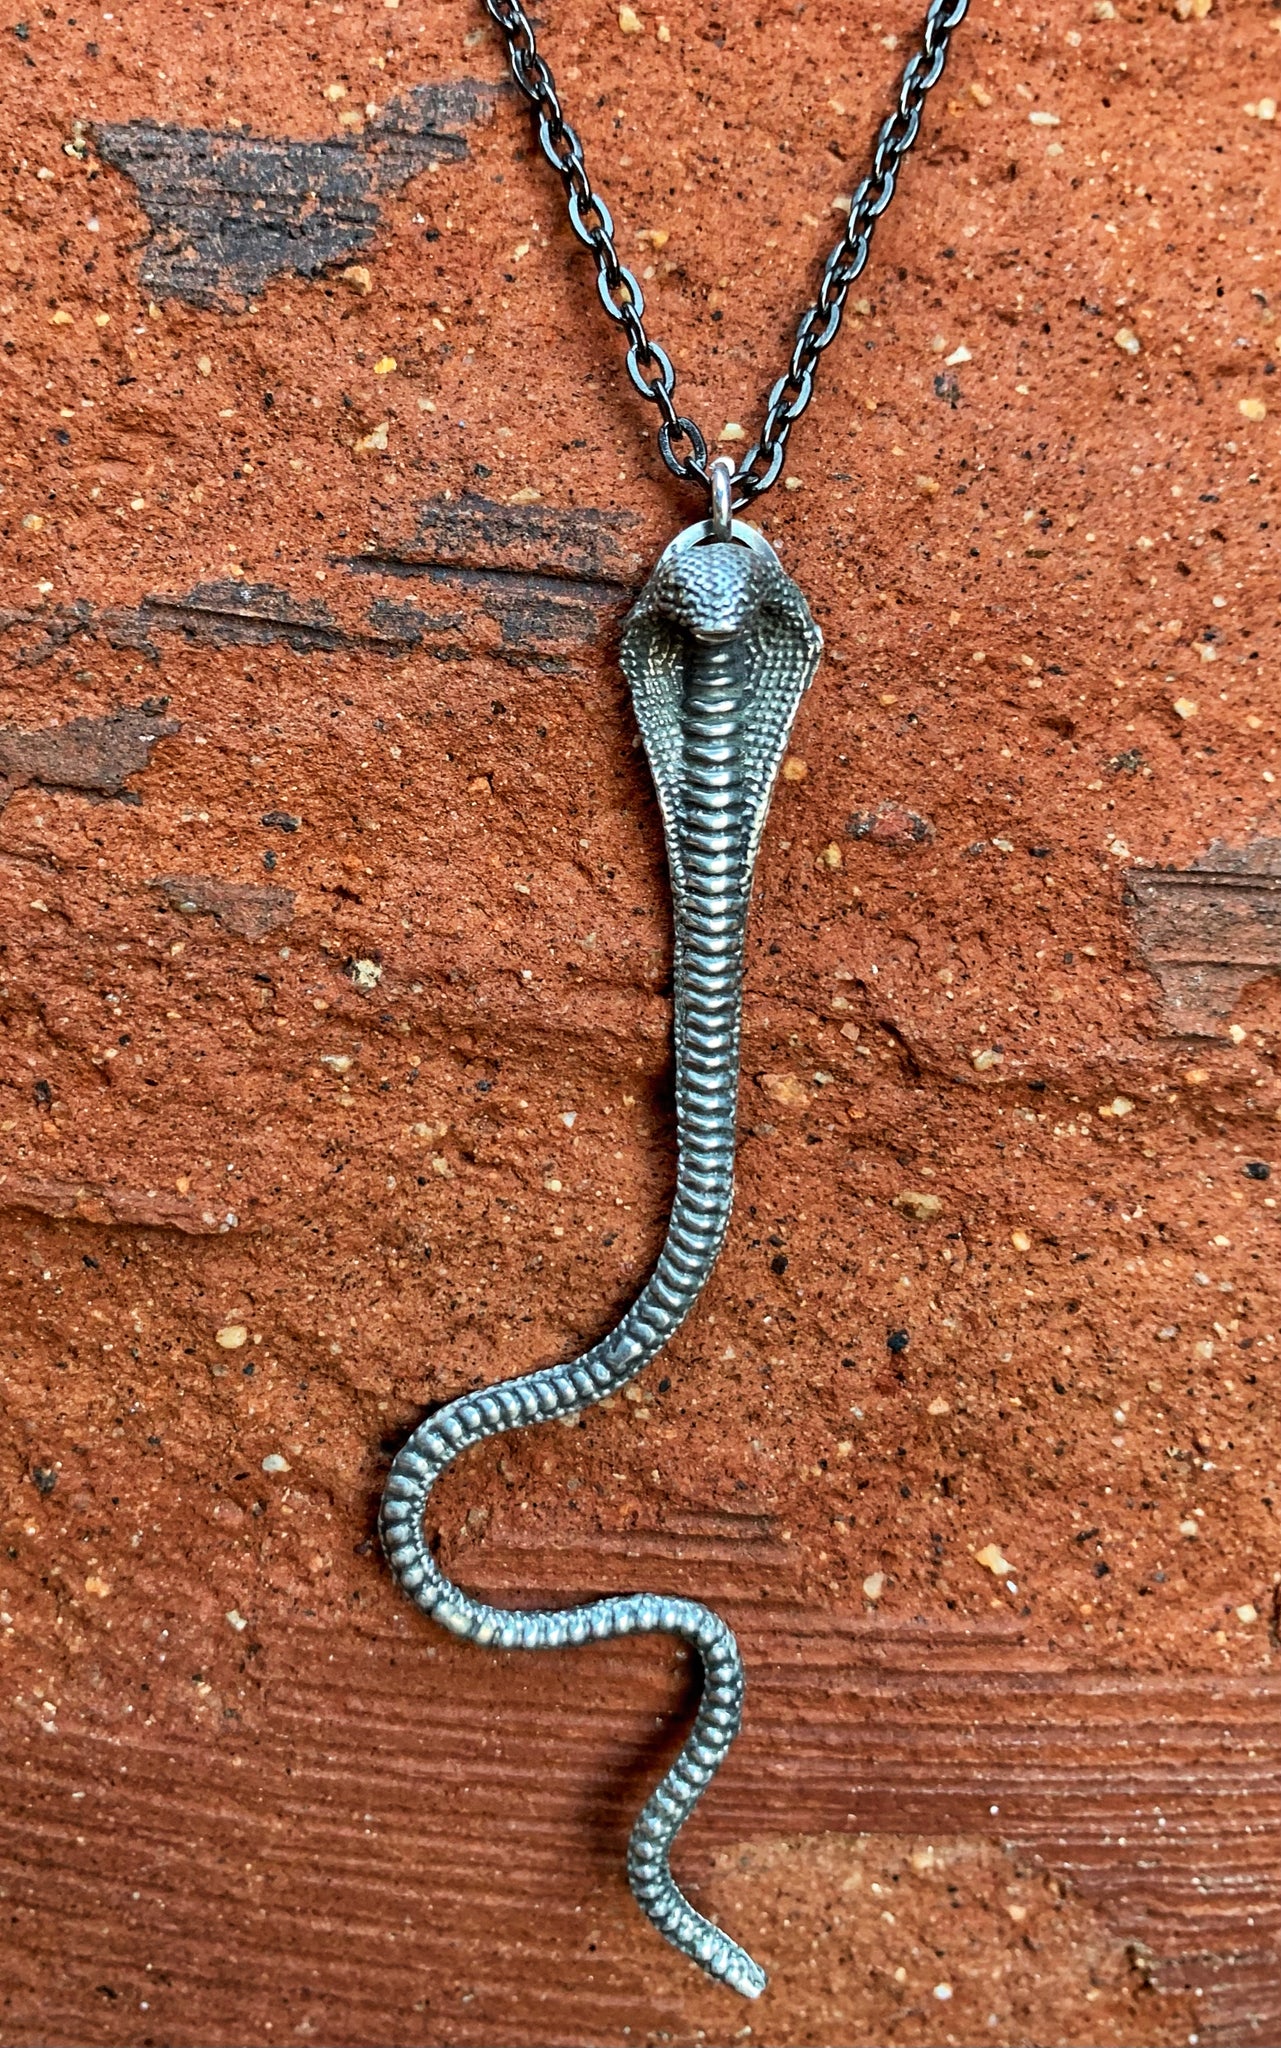 Cobra Necklace with Gunmetal Chain